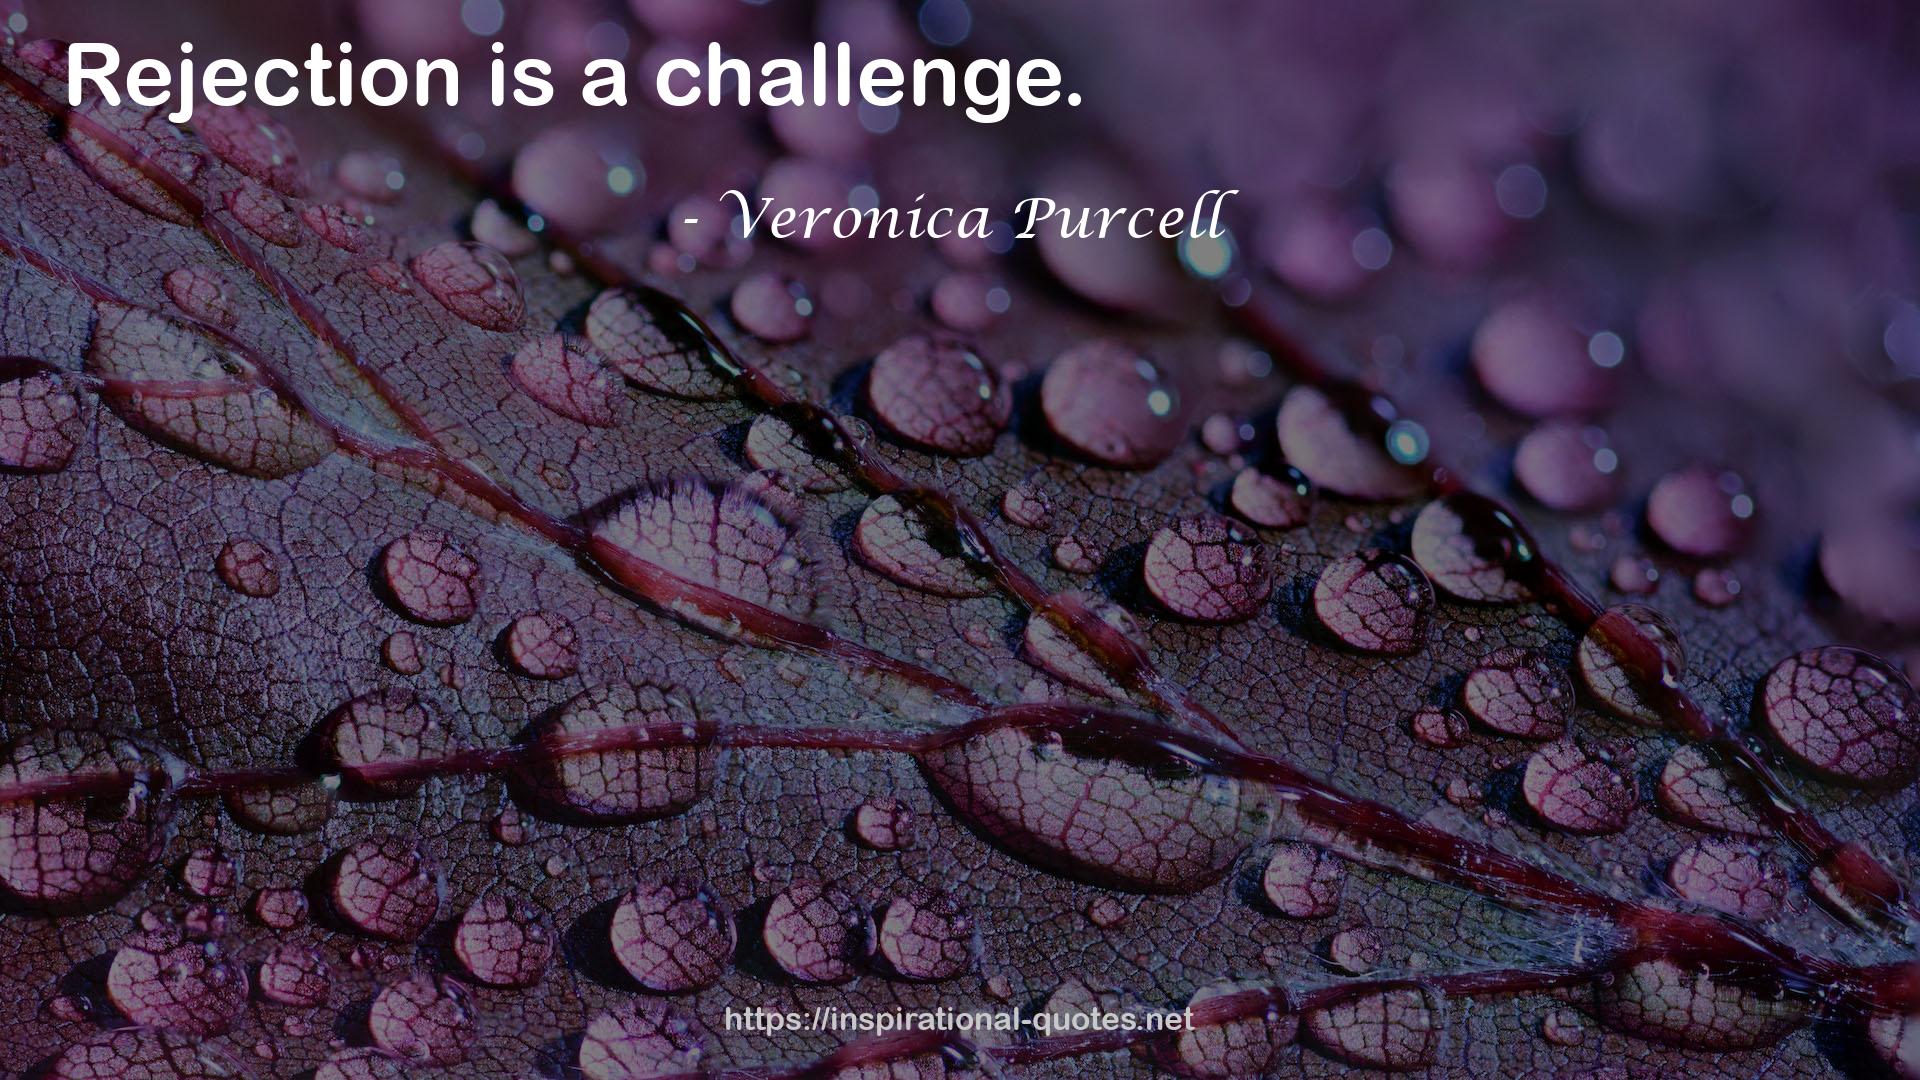 Veronica Purcell QUOTES